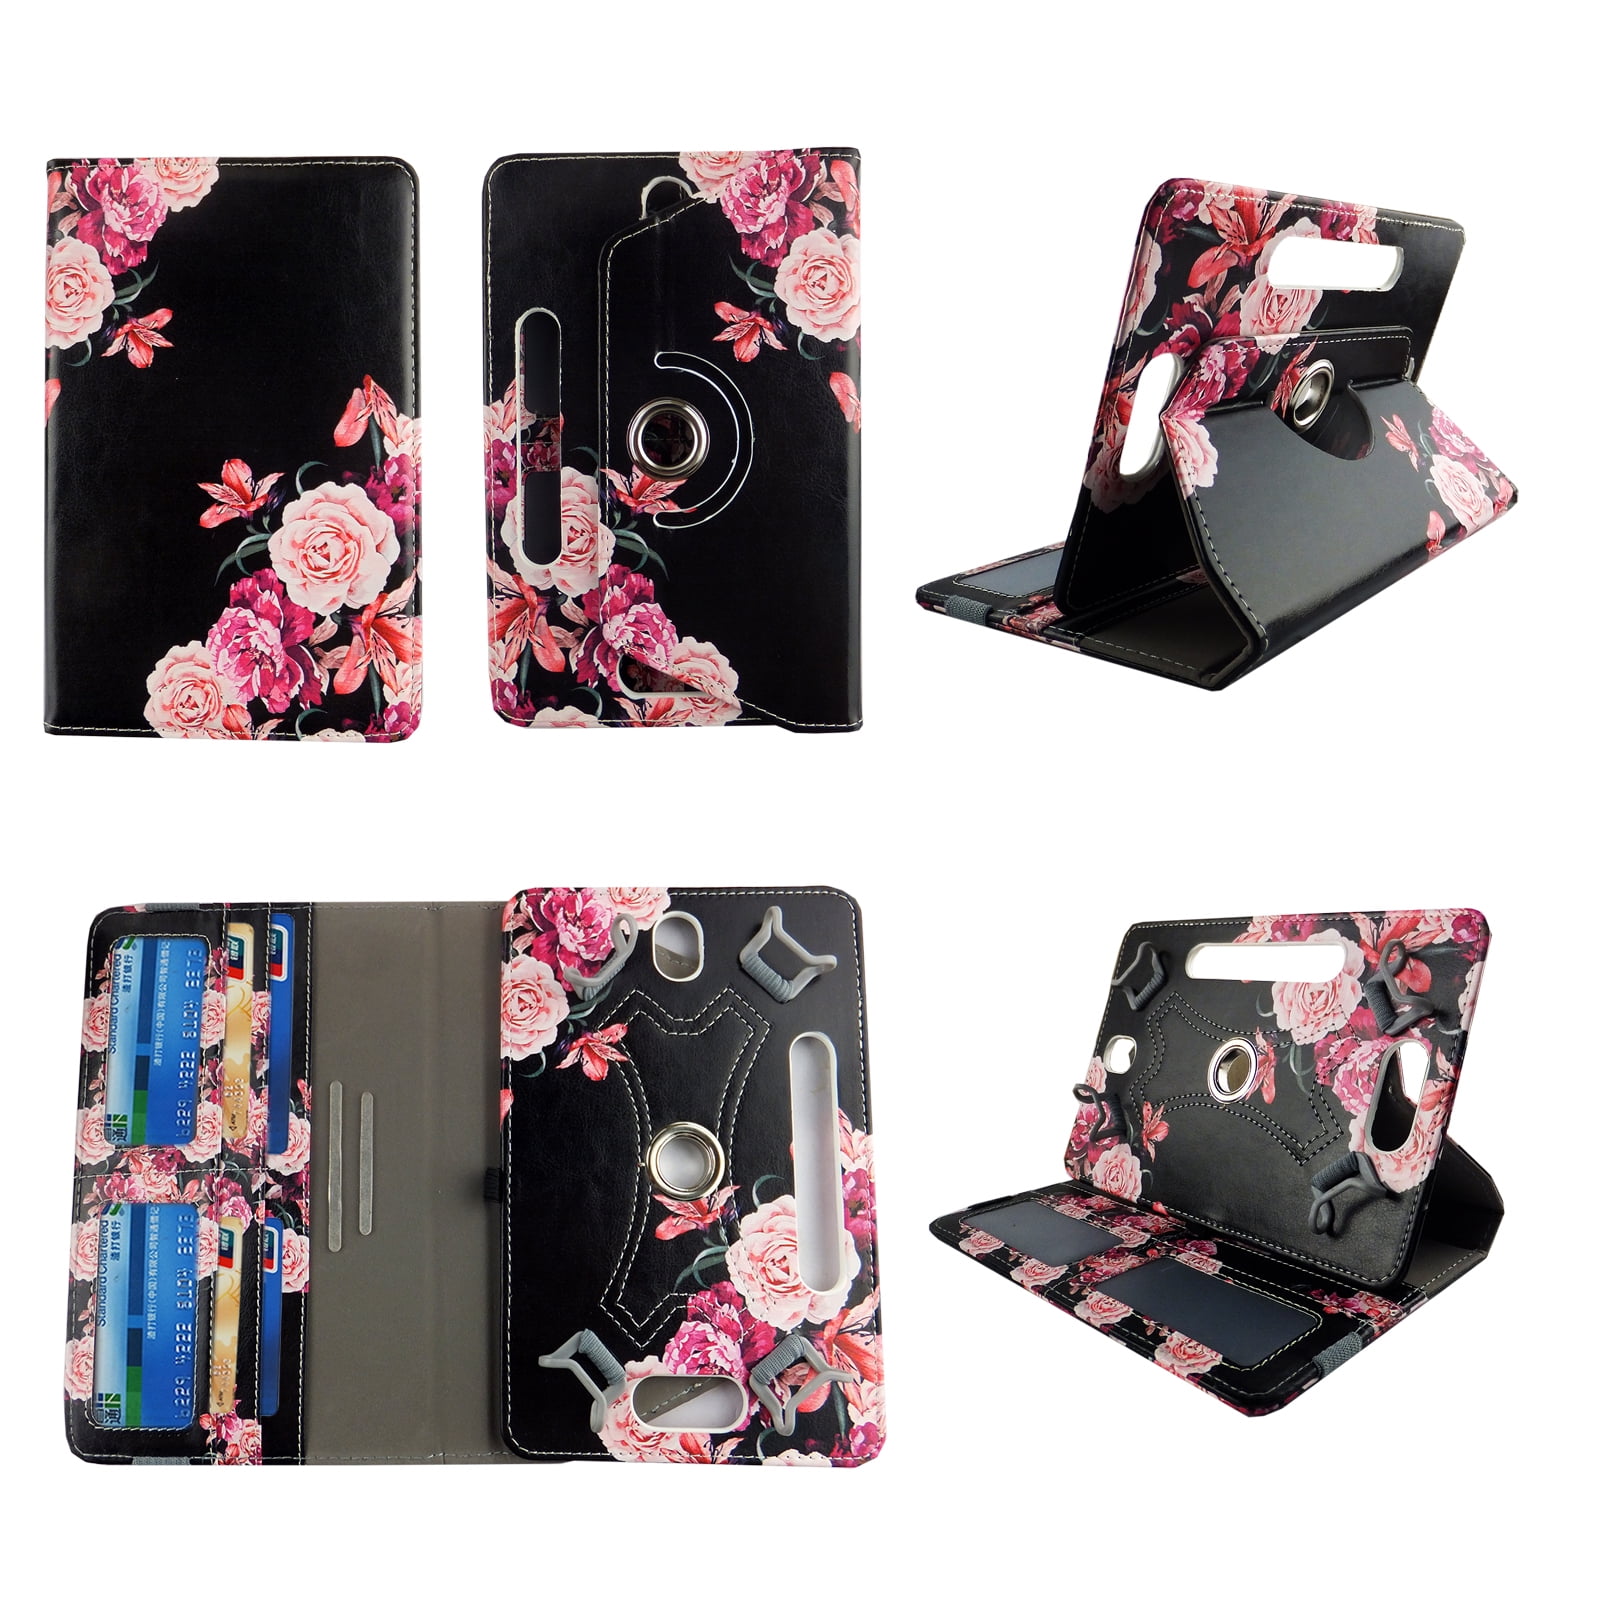 poort transmissie Op de kop van Pink Flower Black tablet case 8 inch for Samsung Galaxy Tab 3 8" 8inch  android tablet cases 360 rotating slim folio stand protector pu leather  cover travel e-reader cash slots - Walmart.com